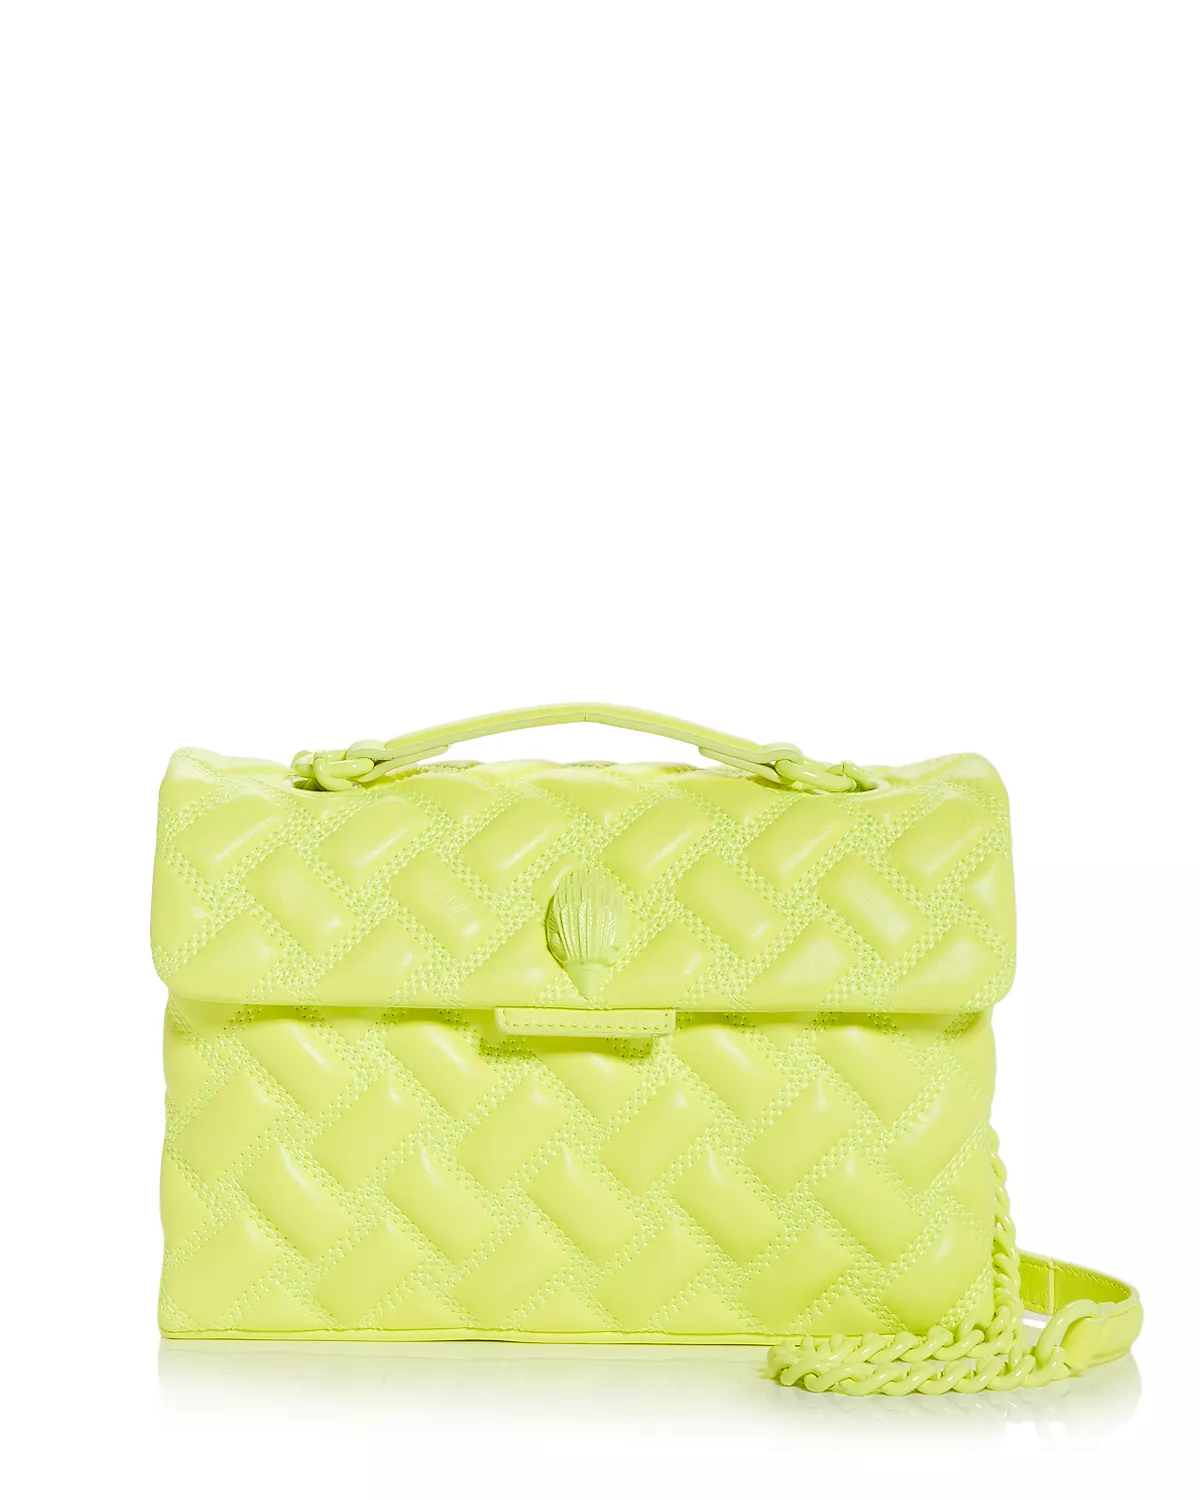 So Electrifying! All The Neon Fashion To Match The Festival Season Vibe